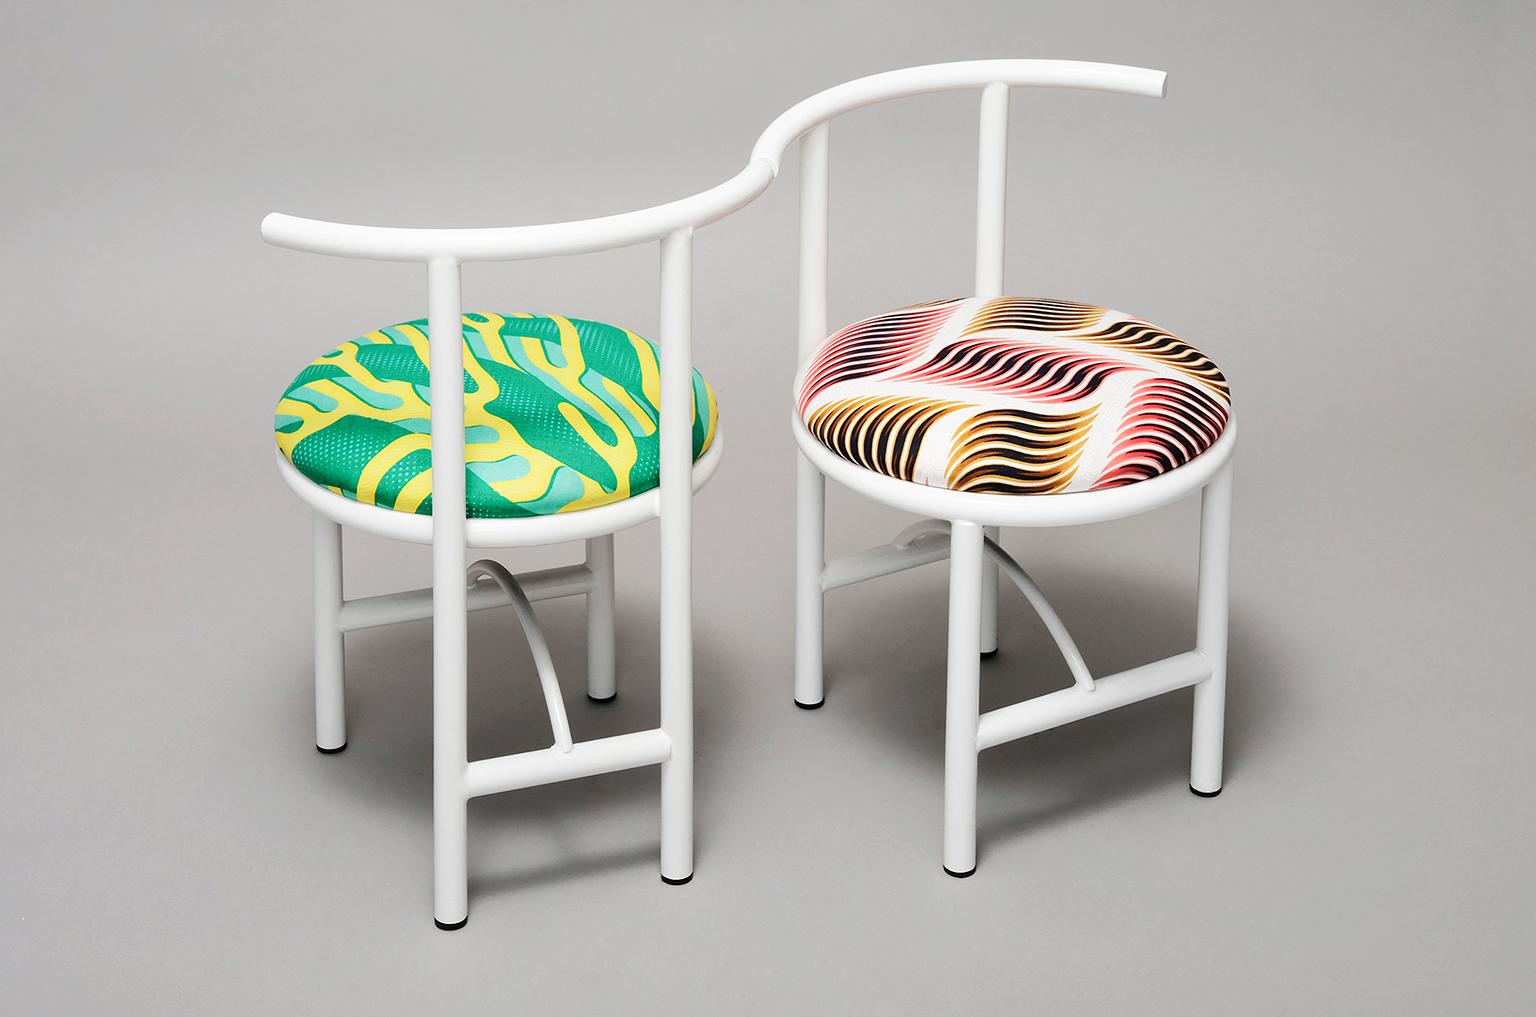 Cantina by Clemence Seilles

An attractive and characteristic chair that works as an extra chair in your living room, bedroom or in the hallway. Cantina is an interpretation of the popular restaurant and diner chairs. Its metal curves with a